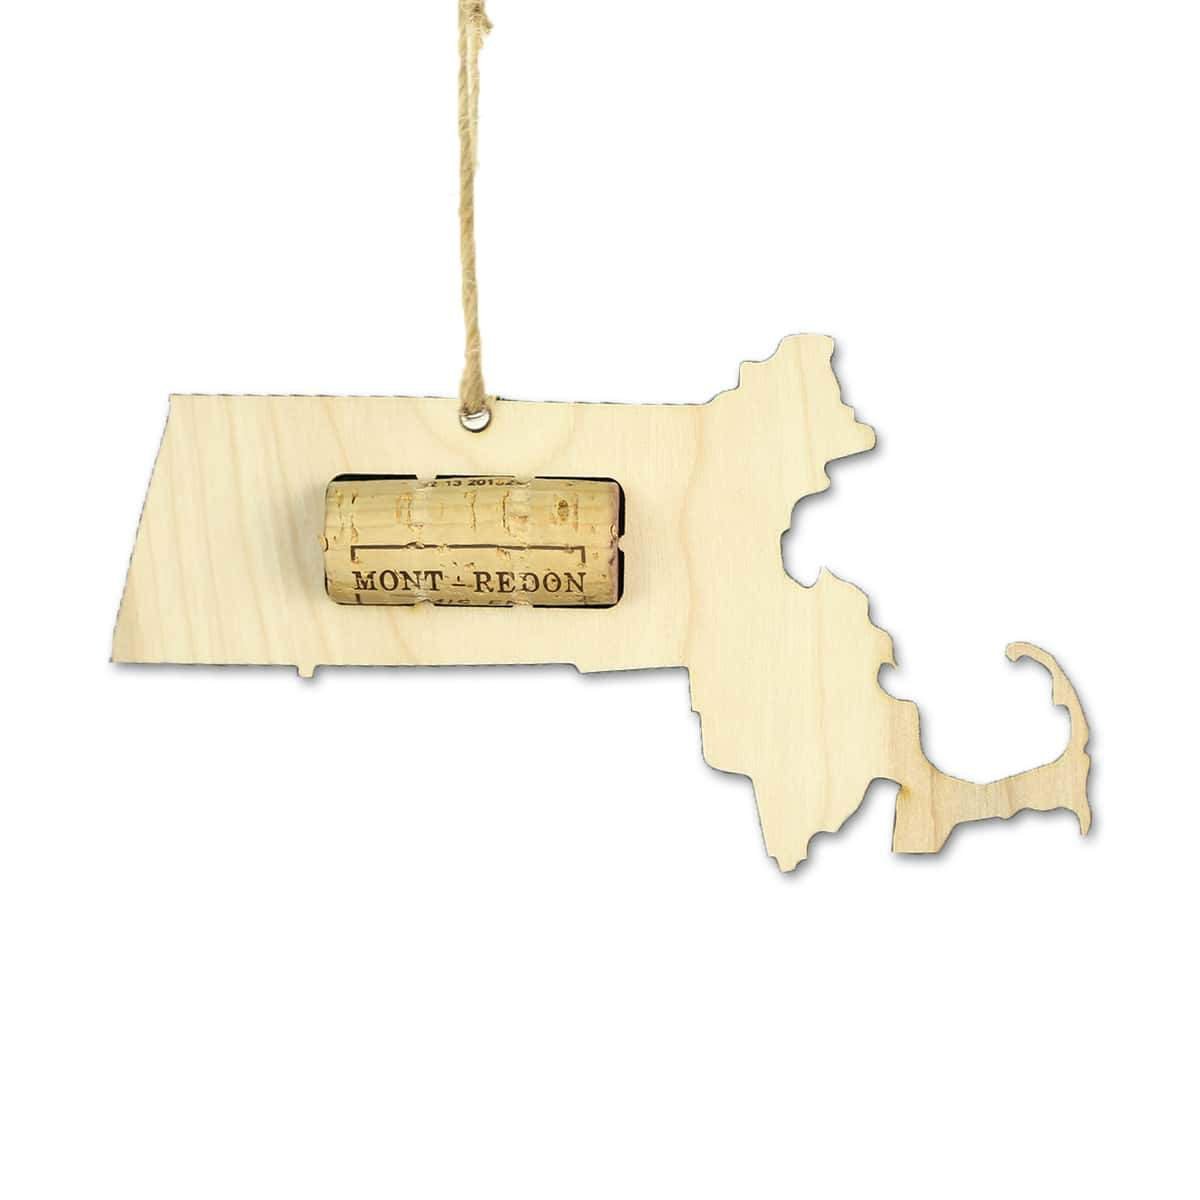 Torched Products Wine Cork Holder Massachusetts Wine Cork Holder Ornaments (781200851061)